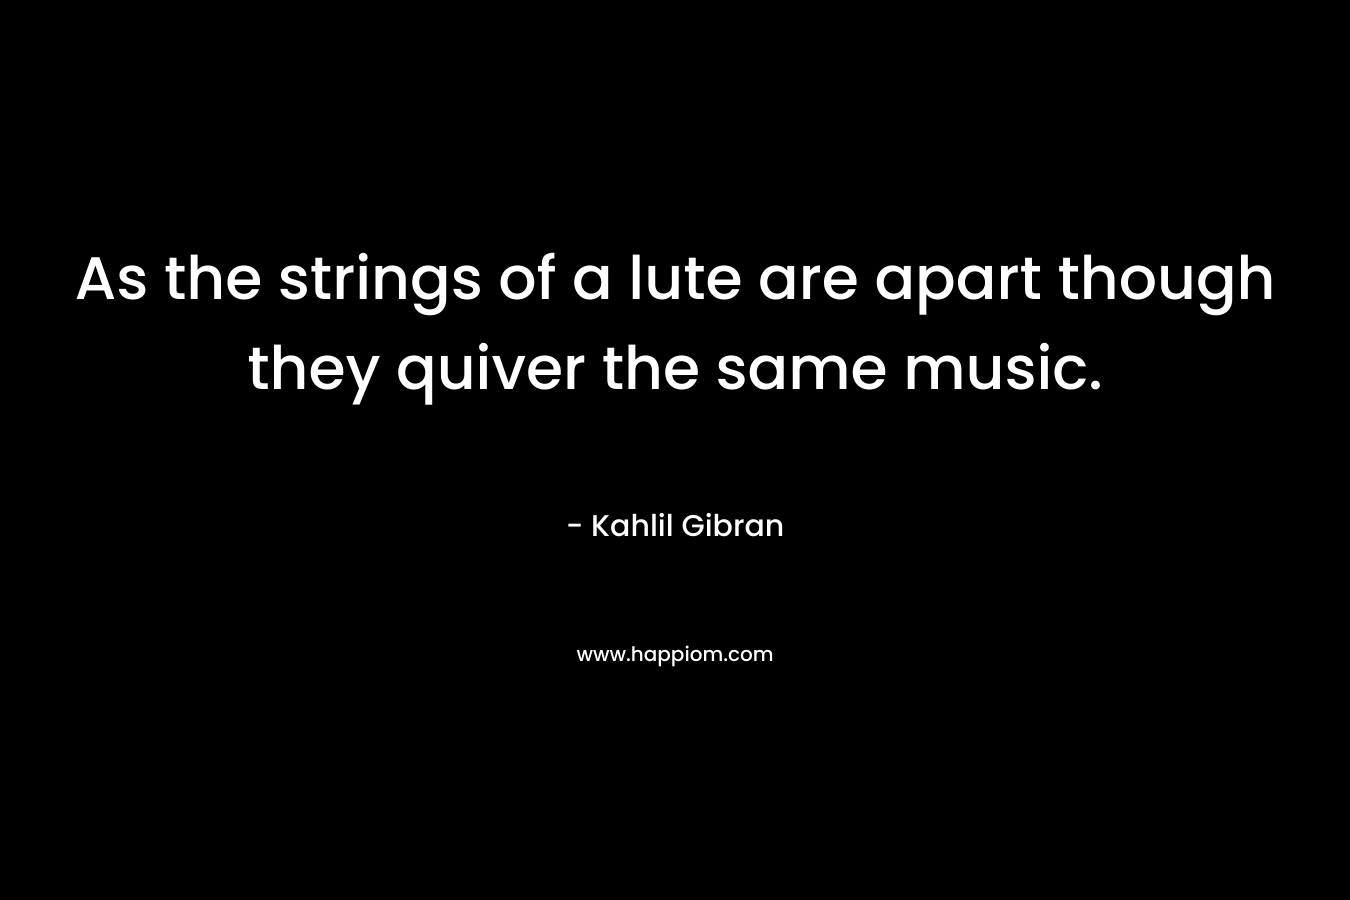 As the strings of a lute are apart though they quiver the same music.